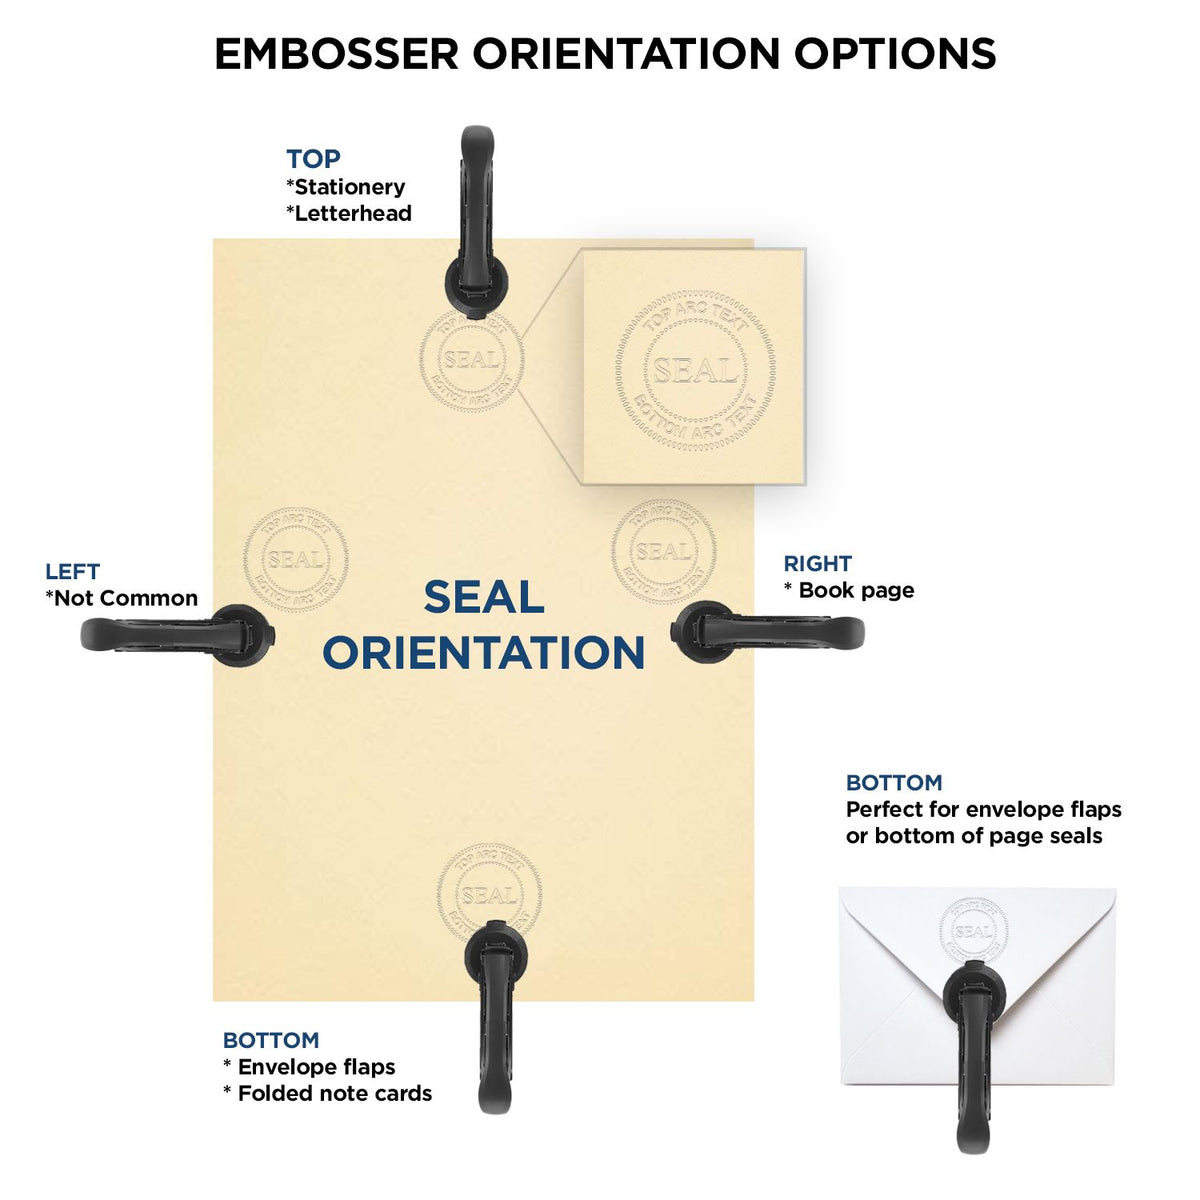 An infographic for the State of Alaska Long Reach Architectural Embossing Seal showing embosser orientation, this is showing examples of a top, bottom, right and left insert.